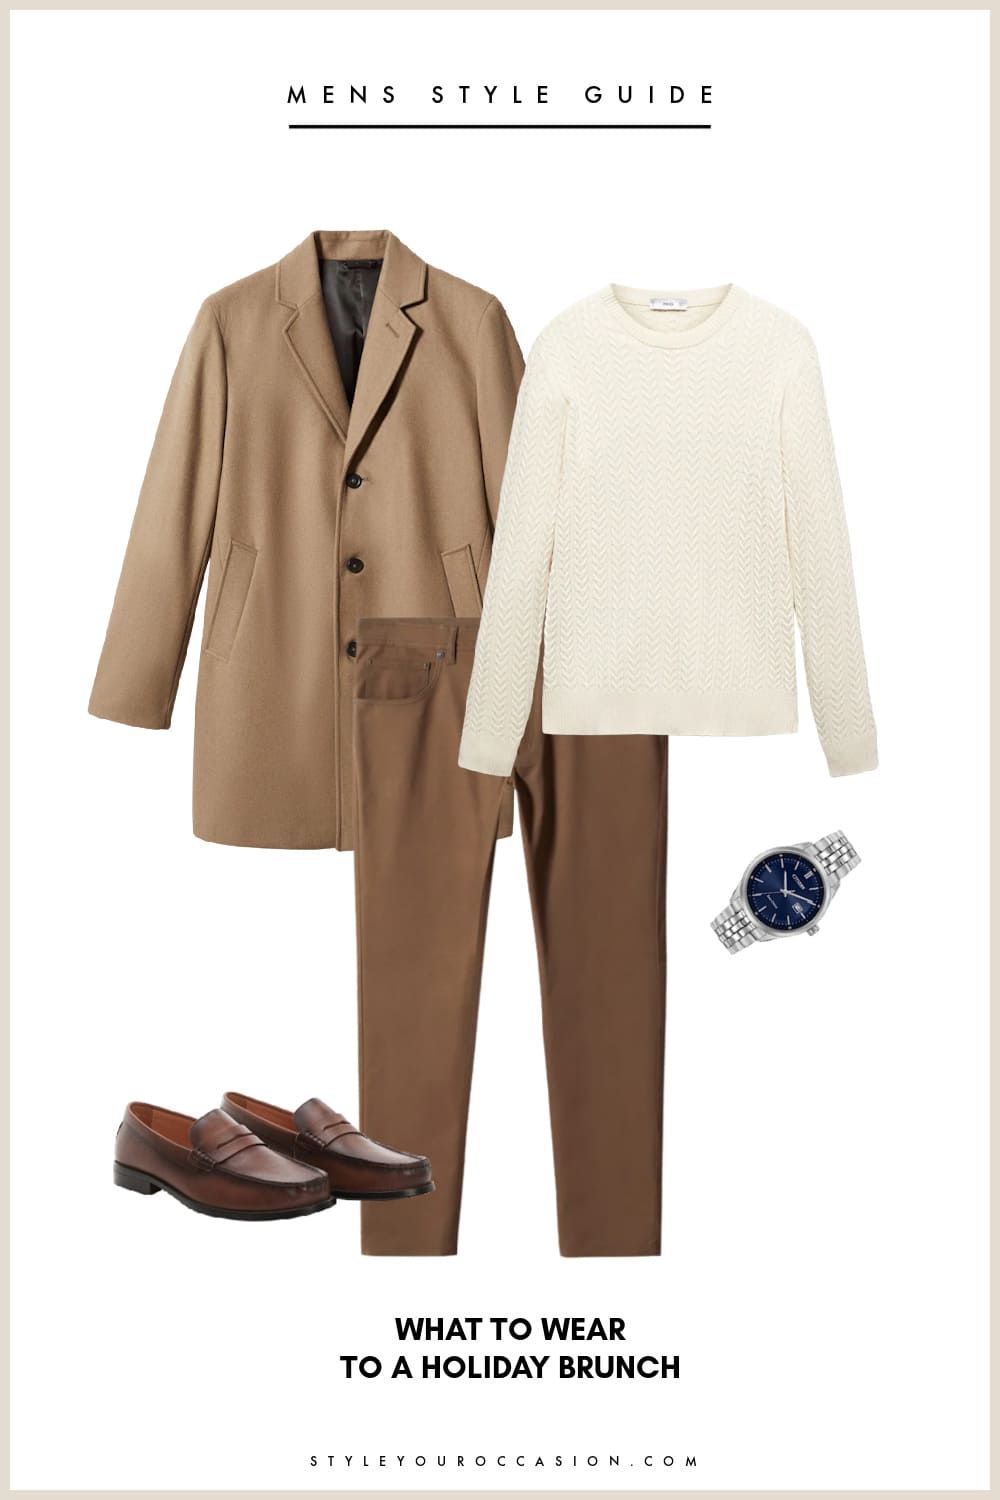 An image board of a mens holiday brunch outfit with brown chinos, an ivory sweater, a tan blazer jacket, brown loafers, and a silver watch